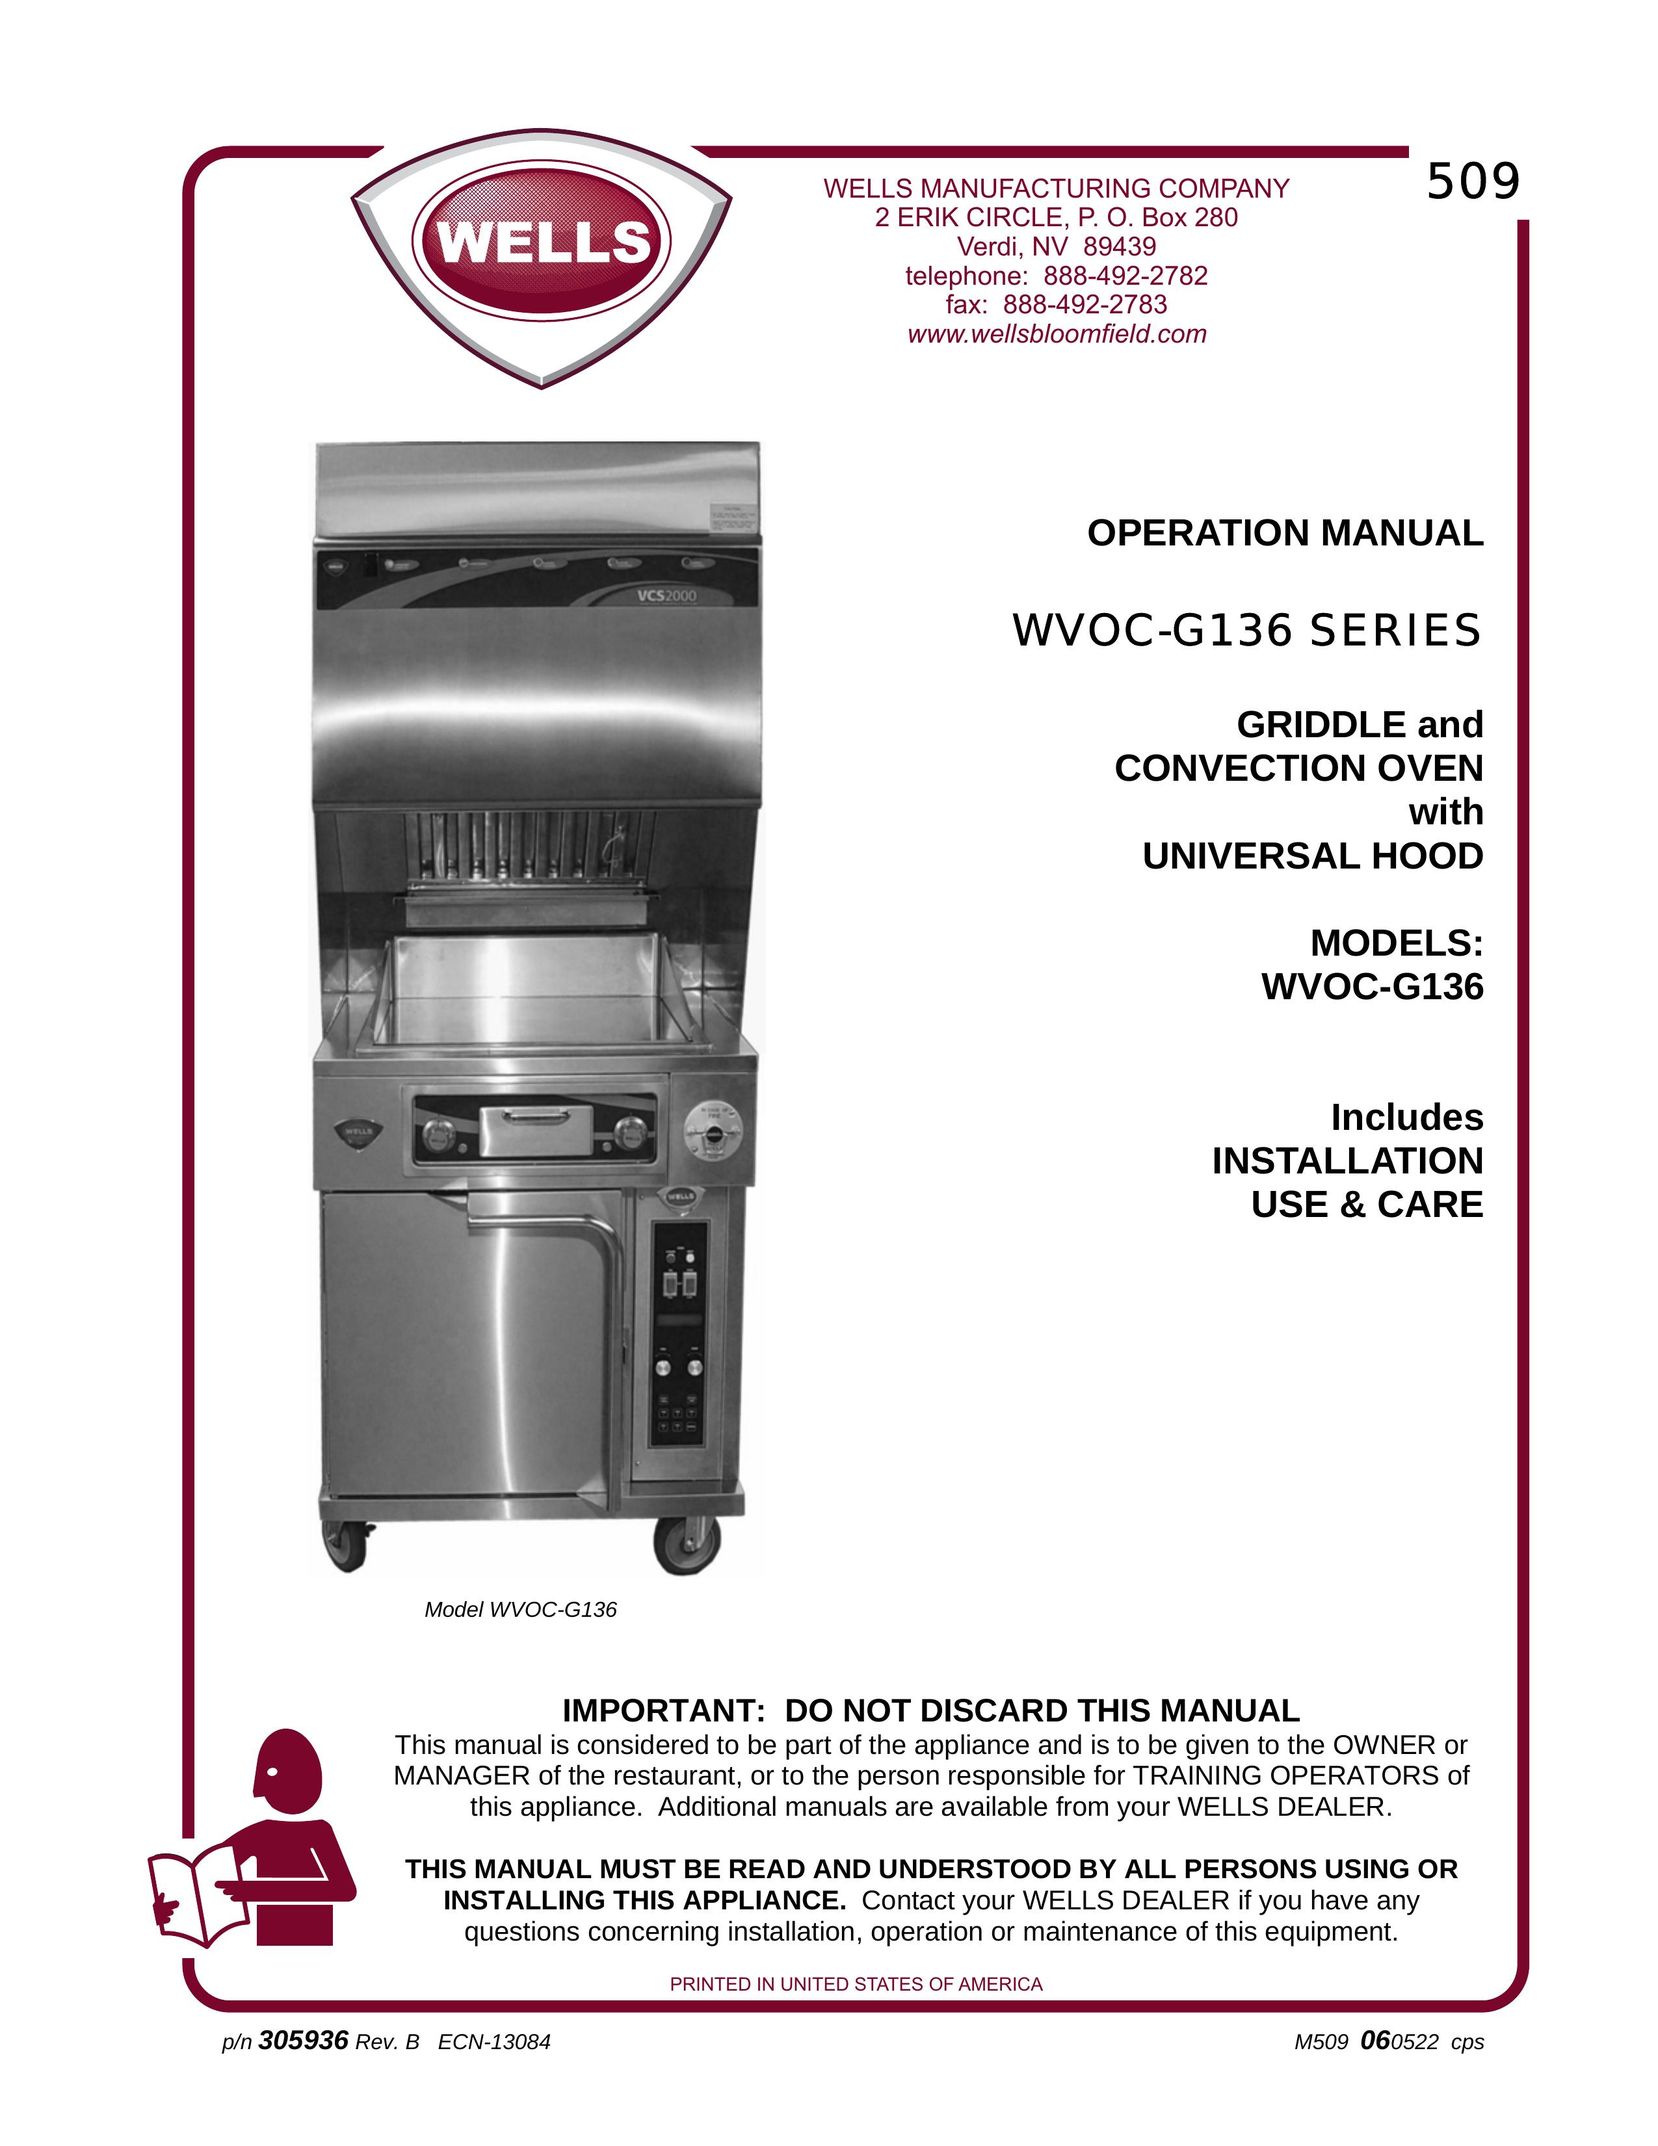 Wells WVOC-G136 Convection Oven User Manual